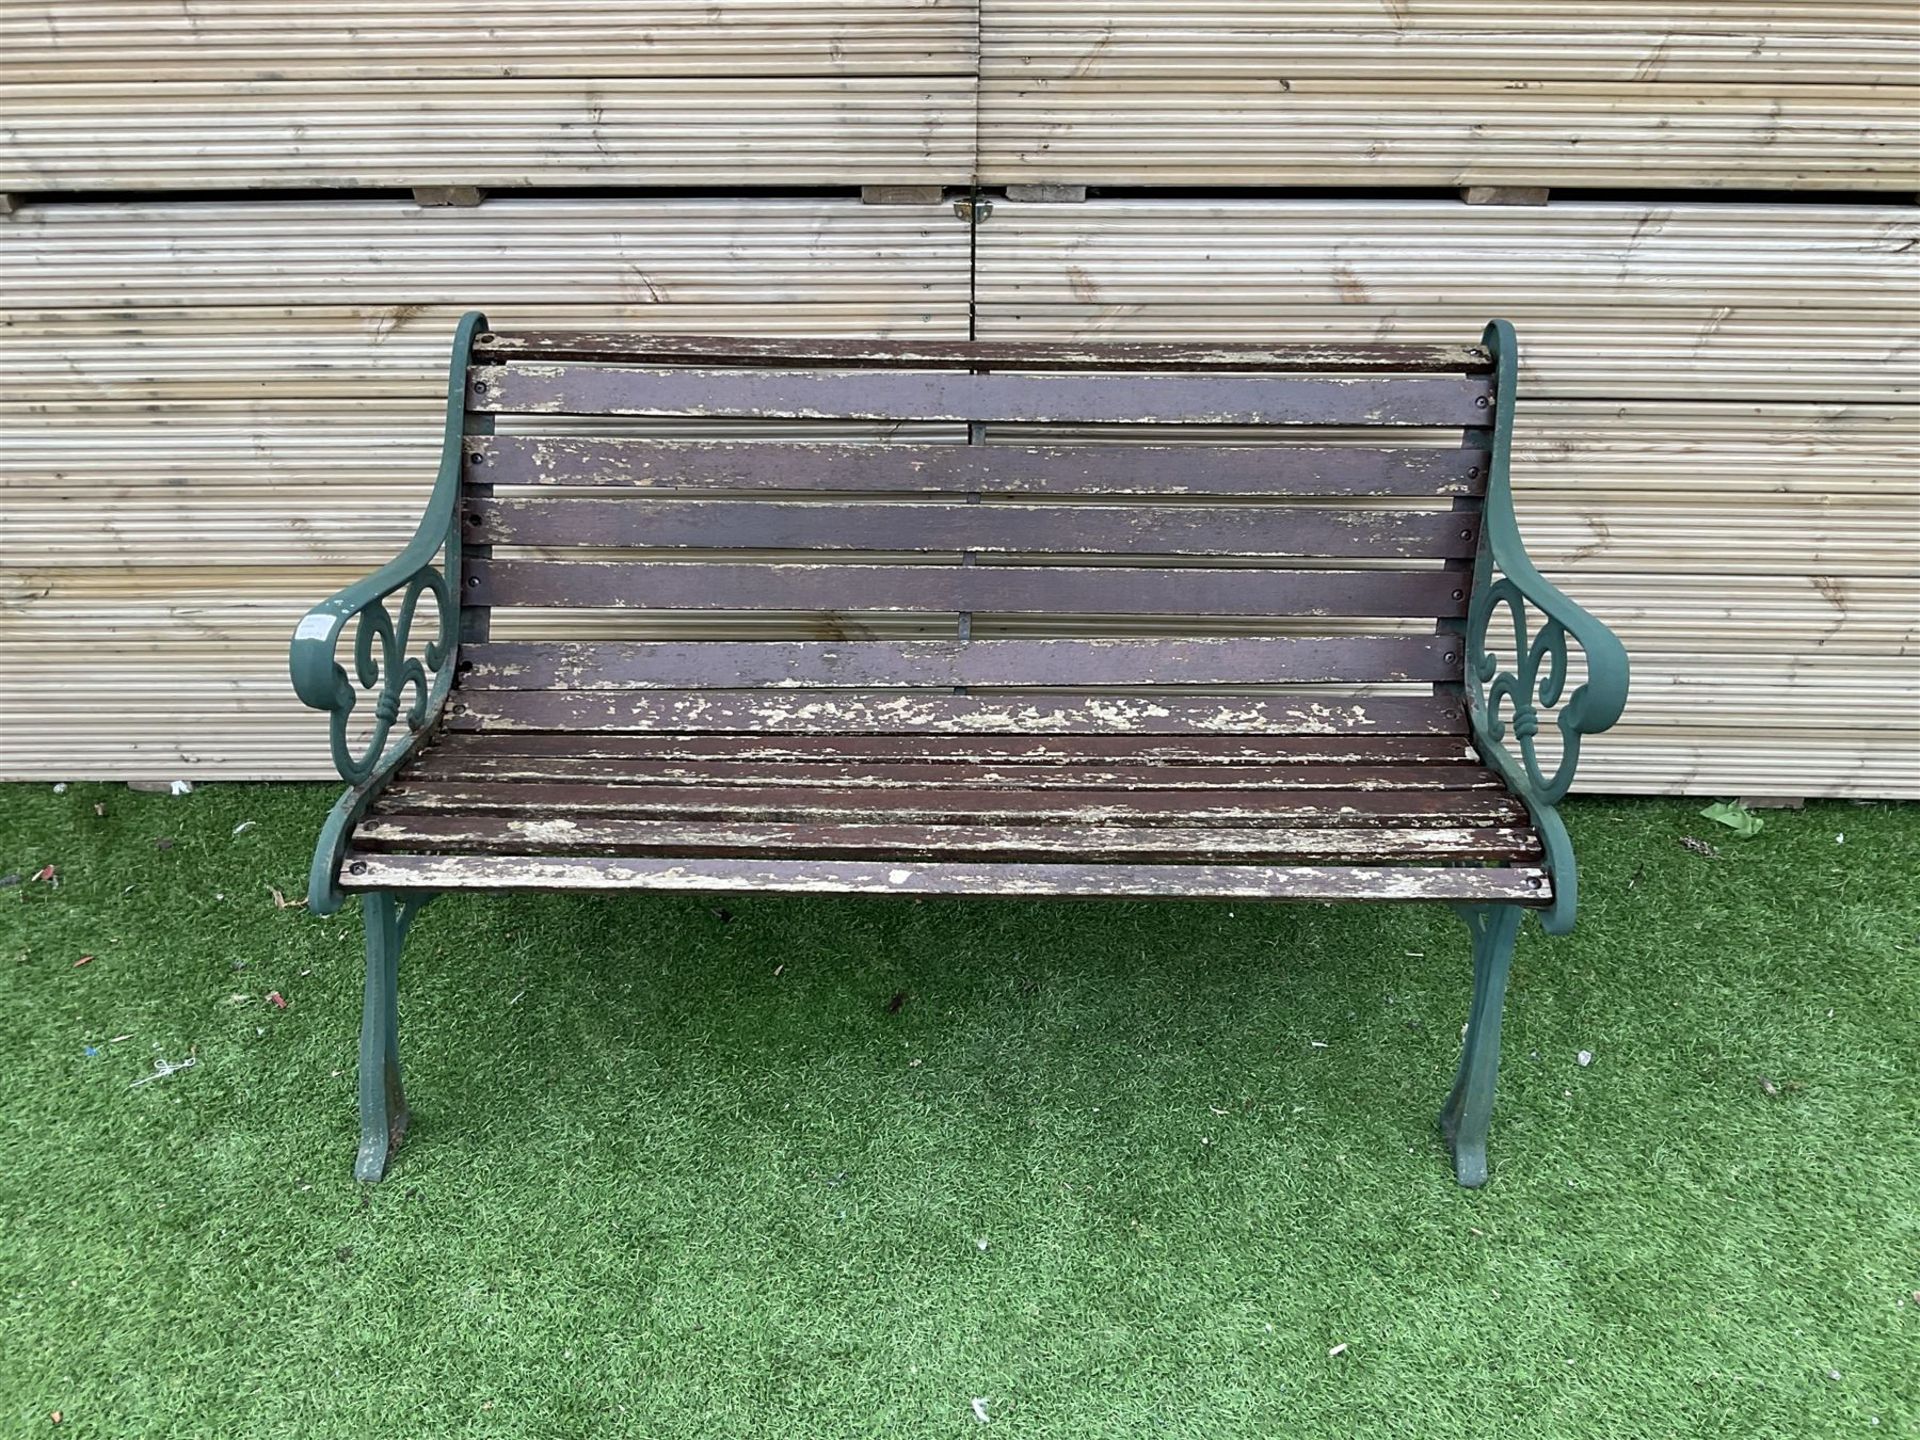 Cast metal and wood slatted garden bench - Image 2 of 3